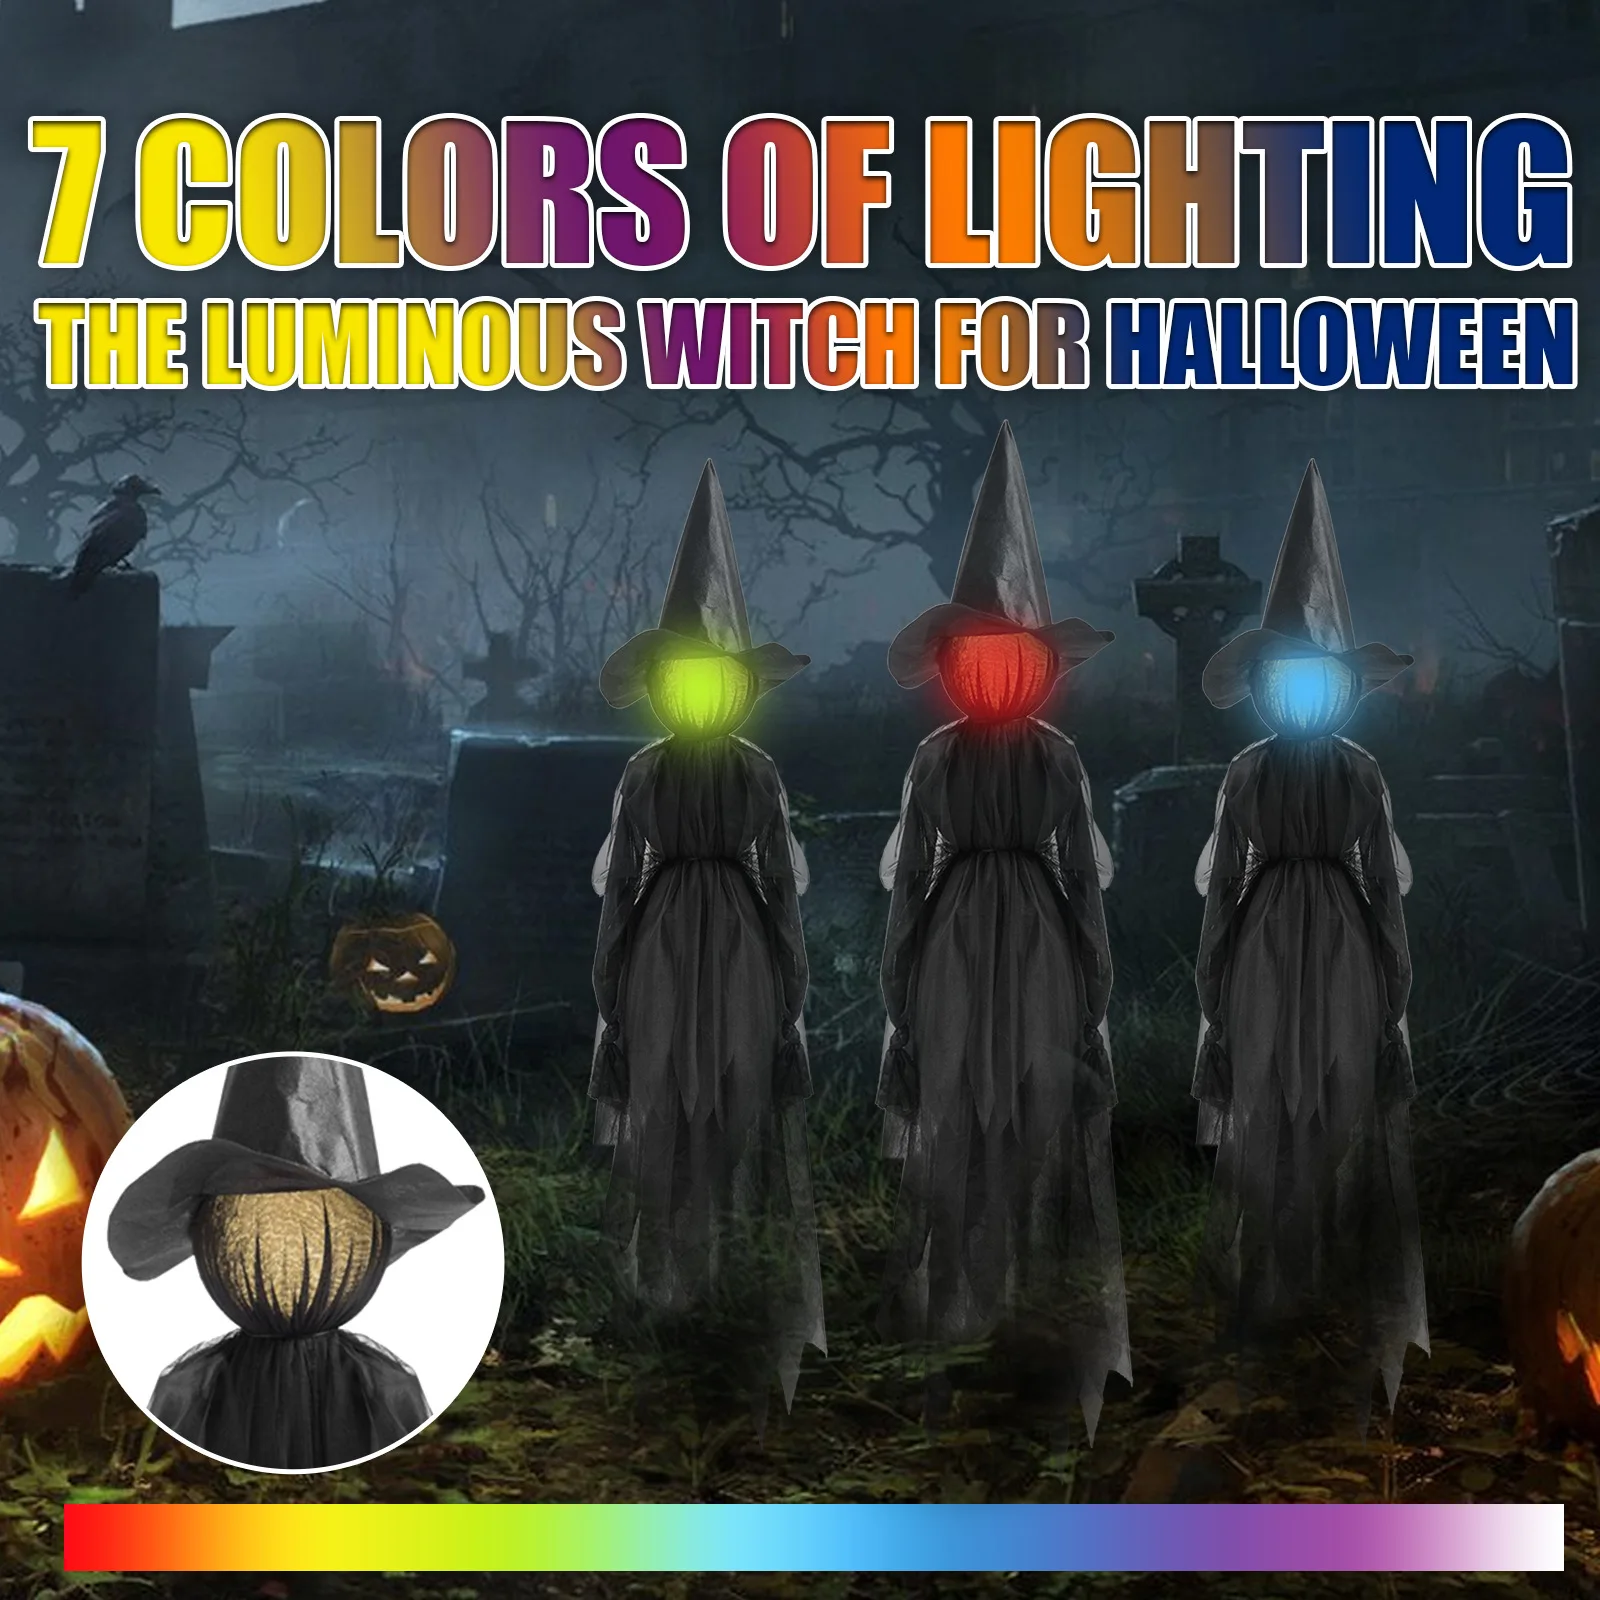 

Halloween Luminous Witches Seven Color Light Three People Holding Hands Decoration Ornaments with Stakes Waterproof Yard Party